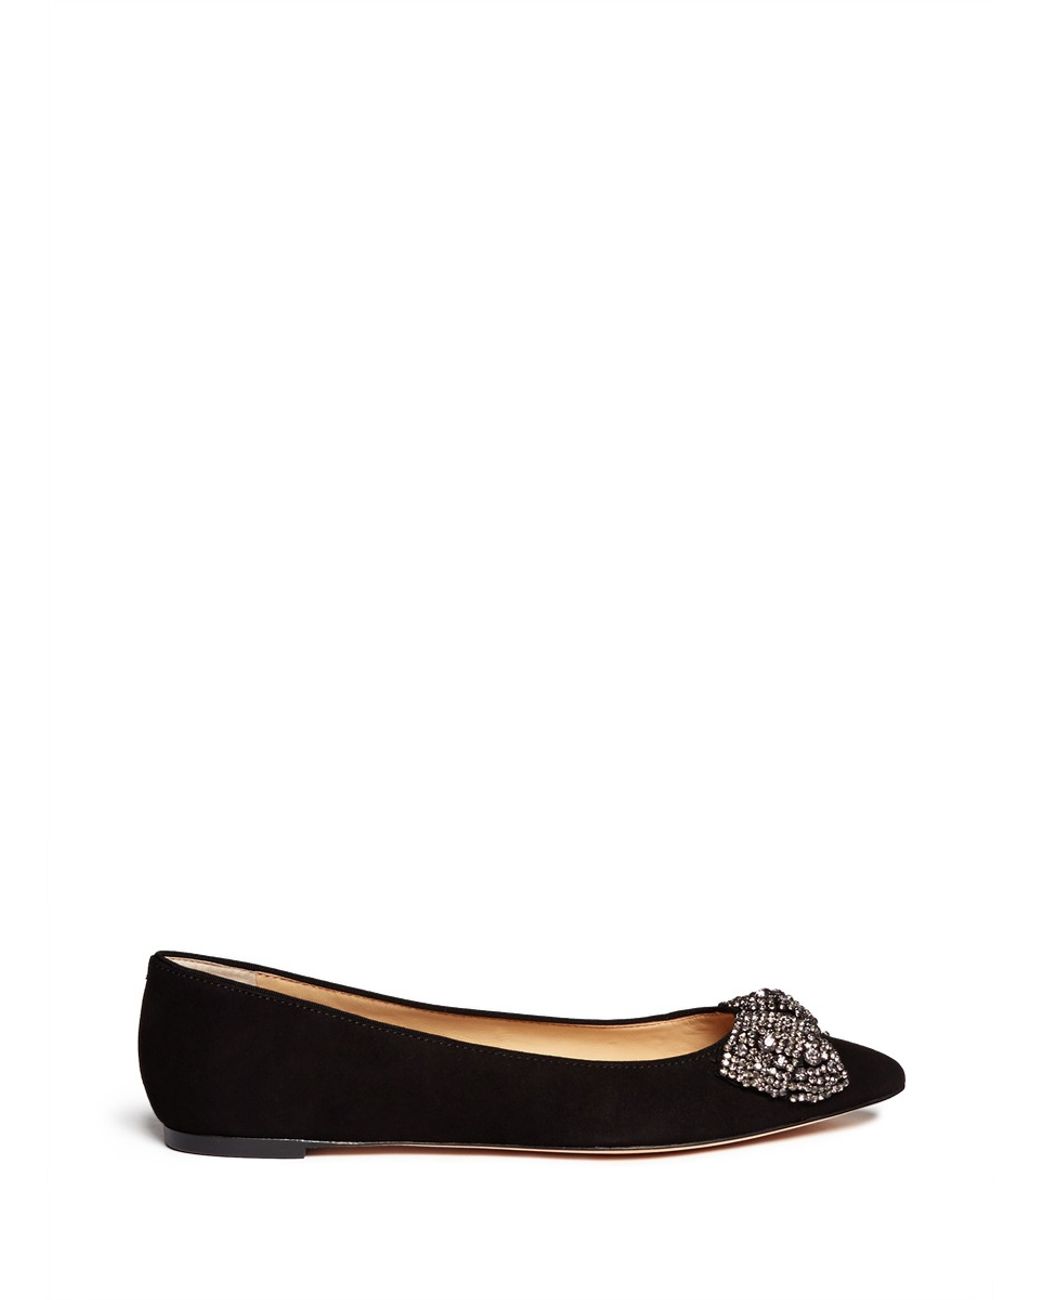 Tory Burch 'vanessa' Crystal Bow Suede Flats in Black | Lyst